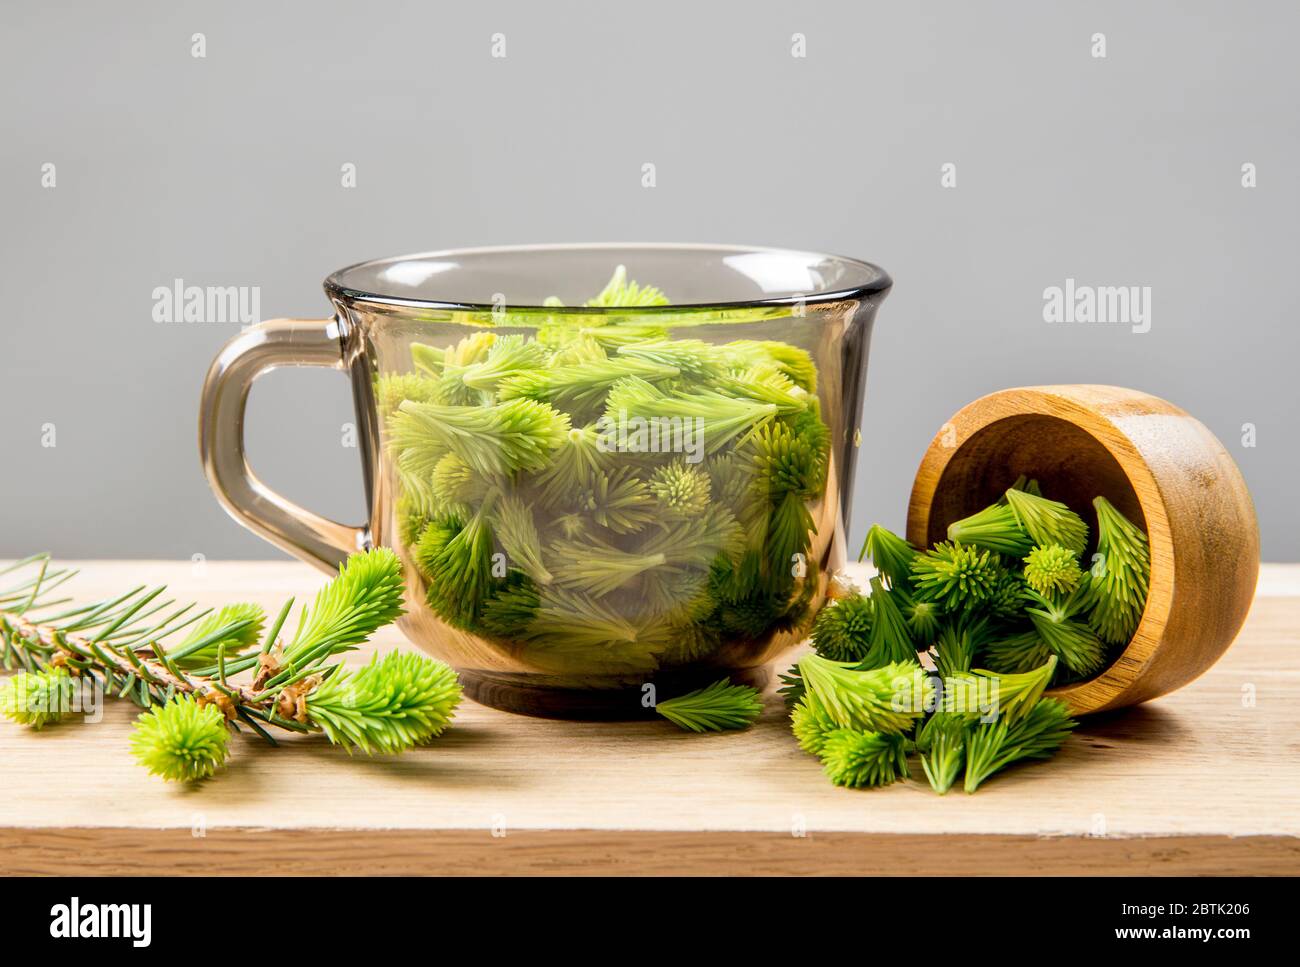 Conceptual image of using fresh young spruce tree (Picea abies) shoots for food and drink. Clear glass cup full of green soft spruce shoots. Alternati Stock Photo